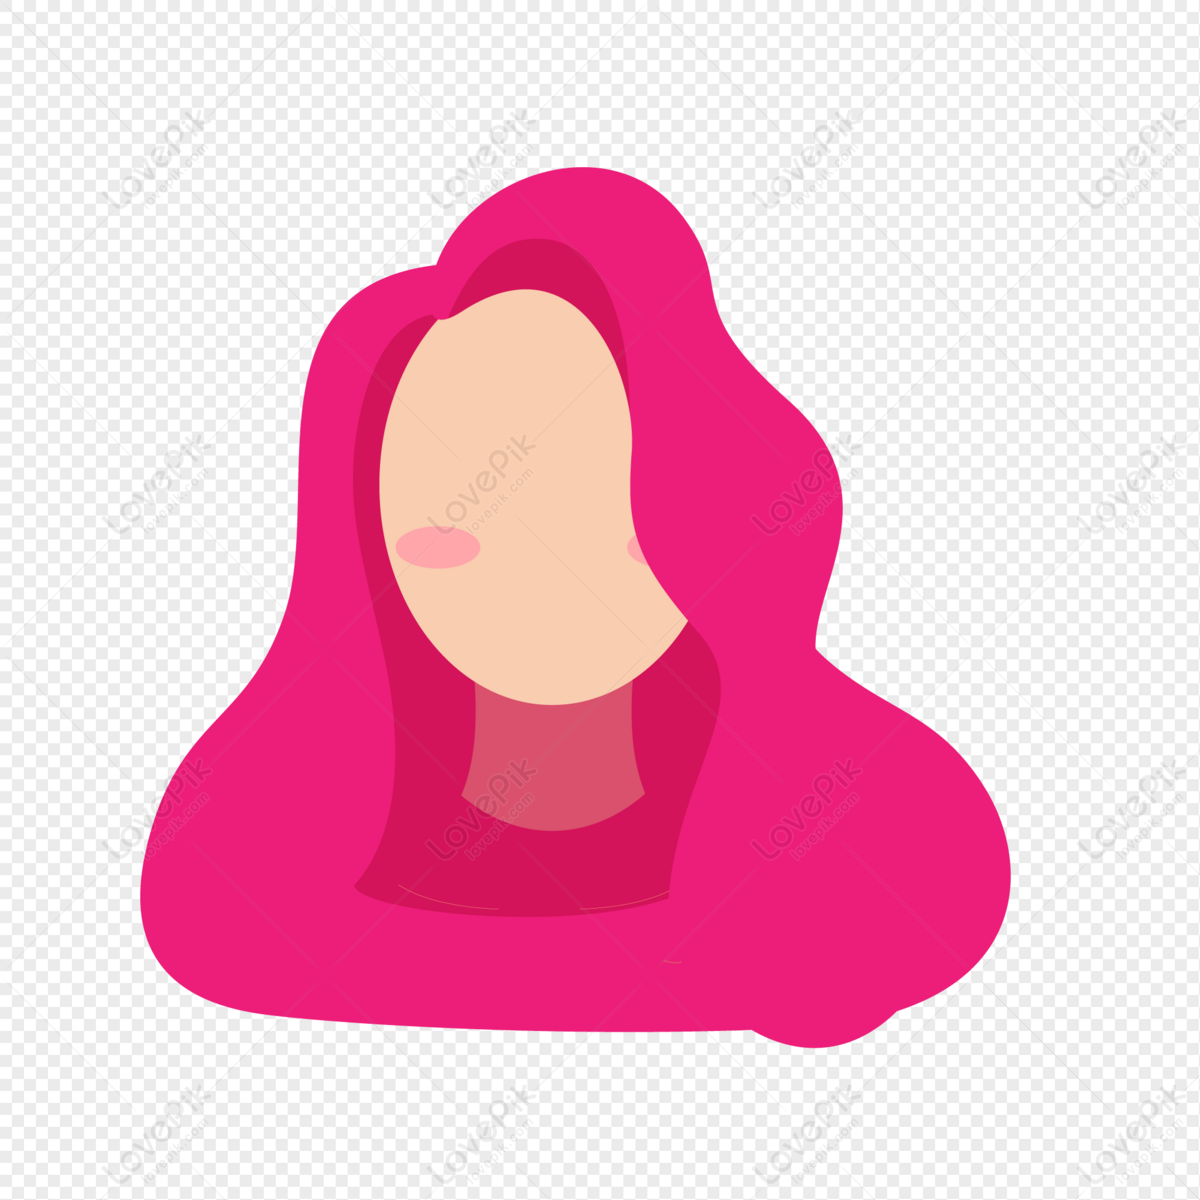 Cute Girls Avatar PNG Picture, Cute Girl Avatar Element Icon